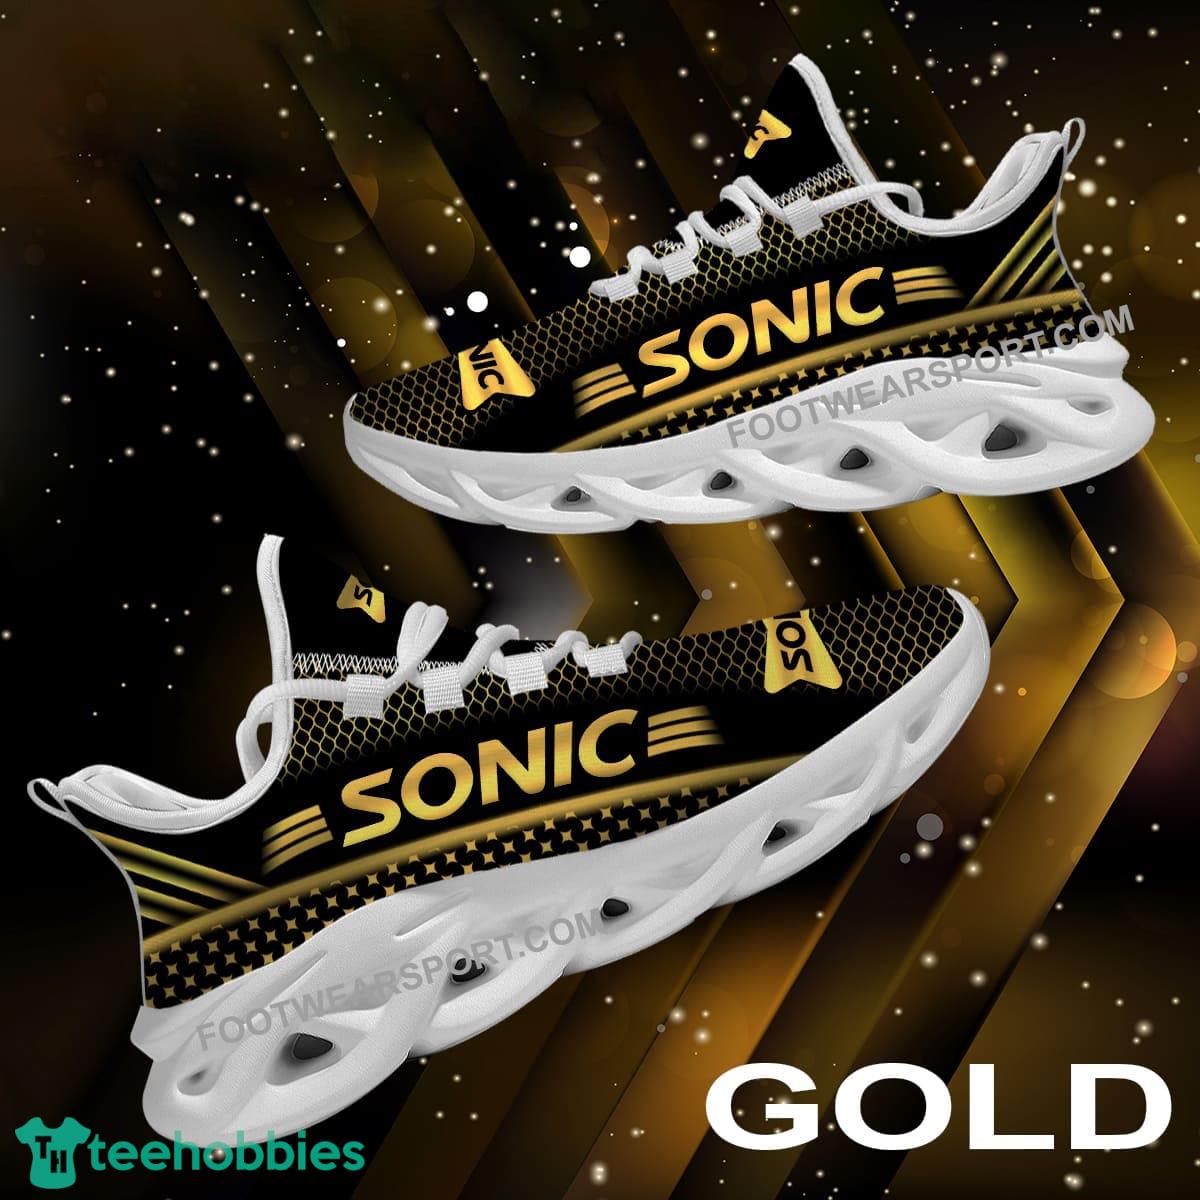 Sonic Drive In Max Soul Shoes Gold Chunky Sneaker Edgy For Fans Gift - Sonic Drive In Max Soul Shoes Gold Chunky Sneaker Edgy For Fans Gift